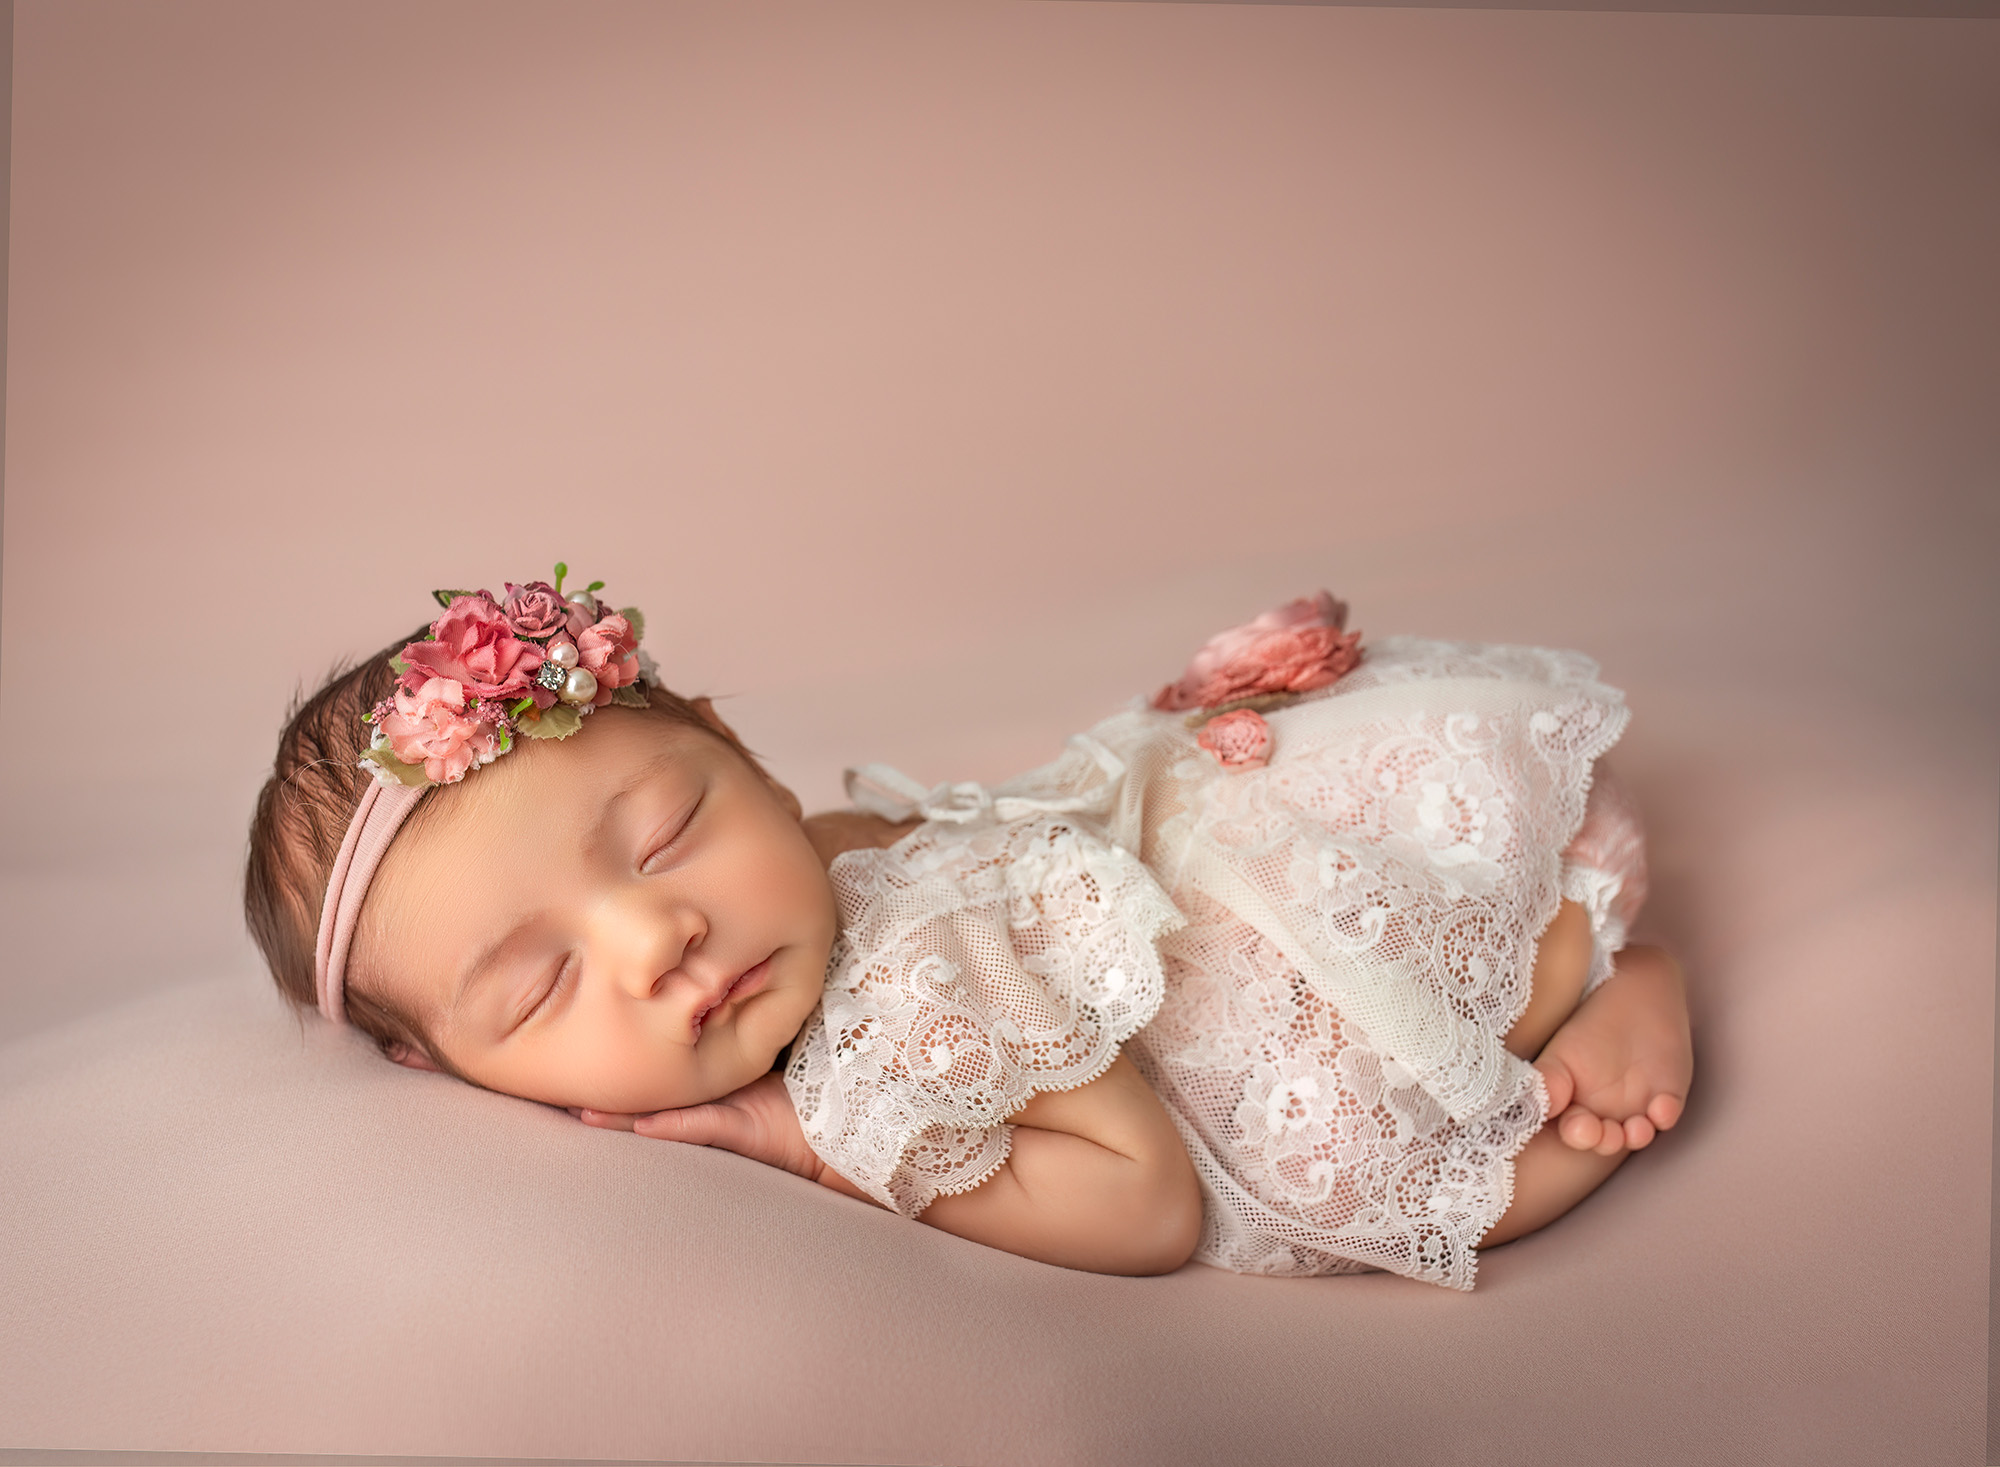 Newborn baby girl wearing a laced dress and floral headband, sleeping on her tummy